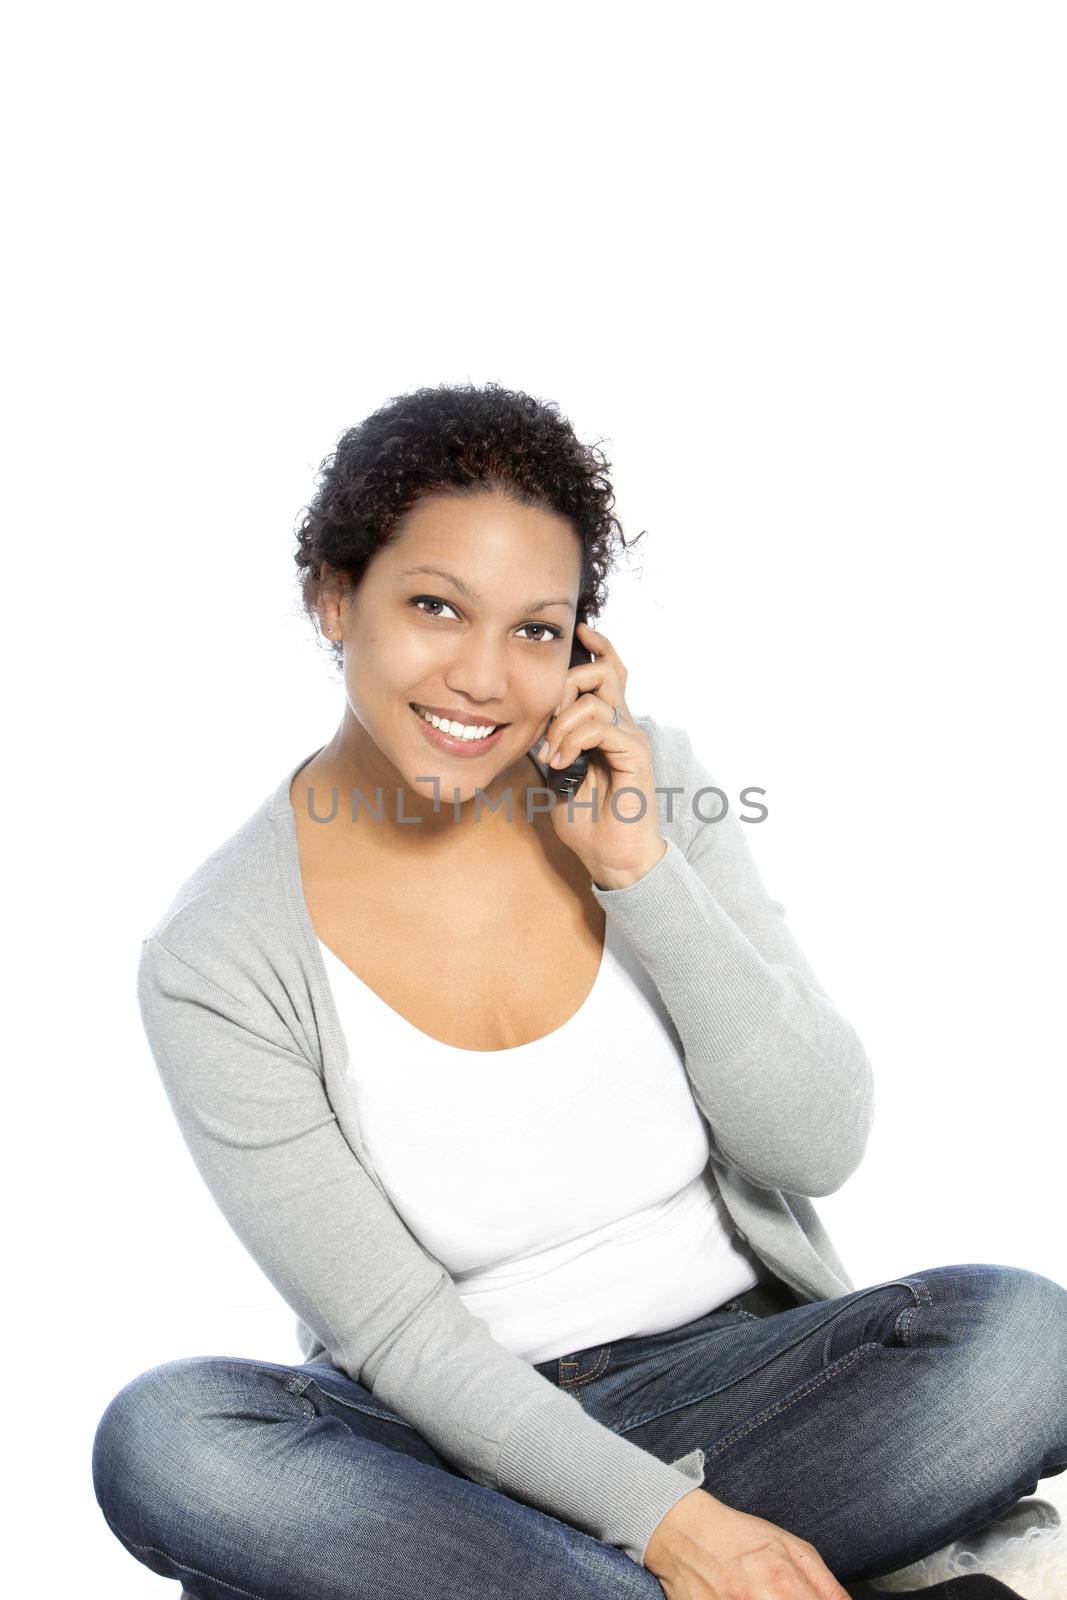 Smiling African American woman calling via cellular phone